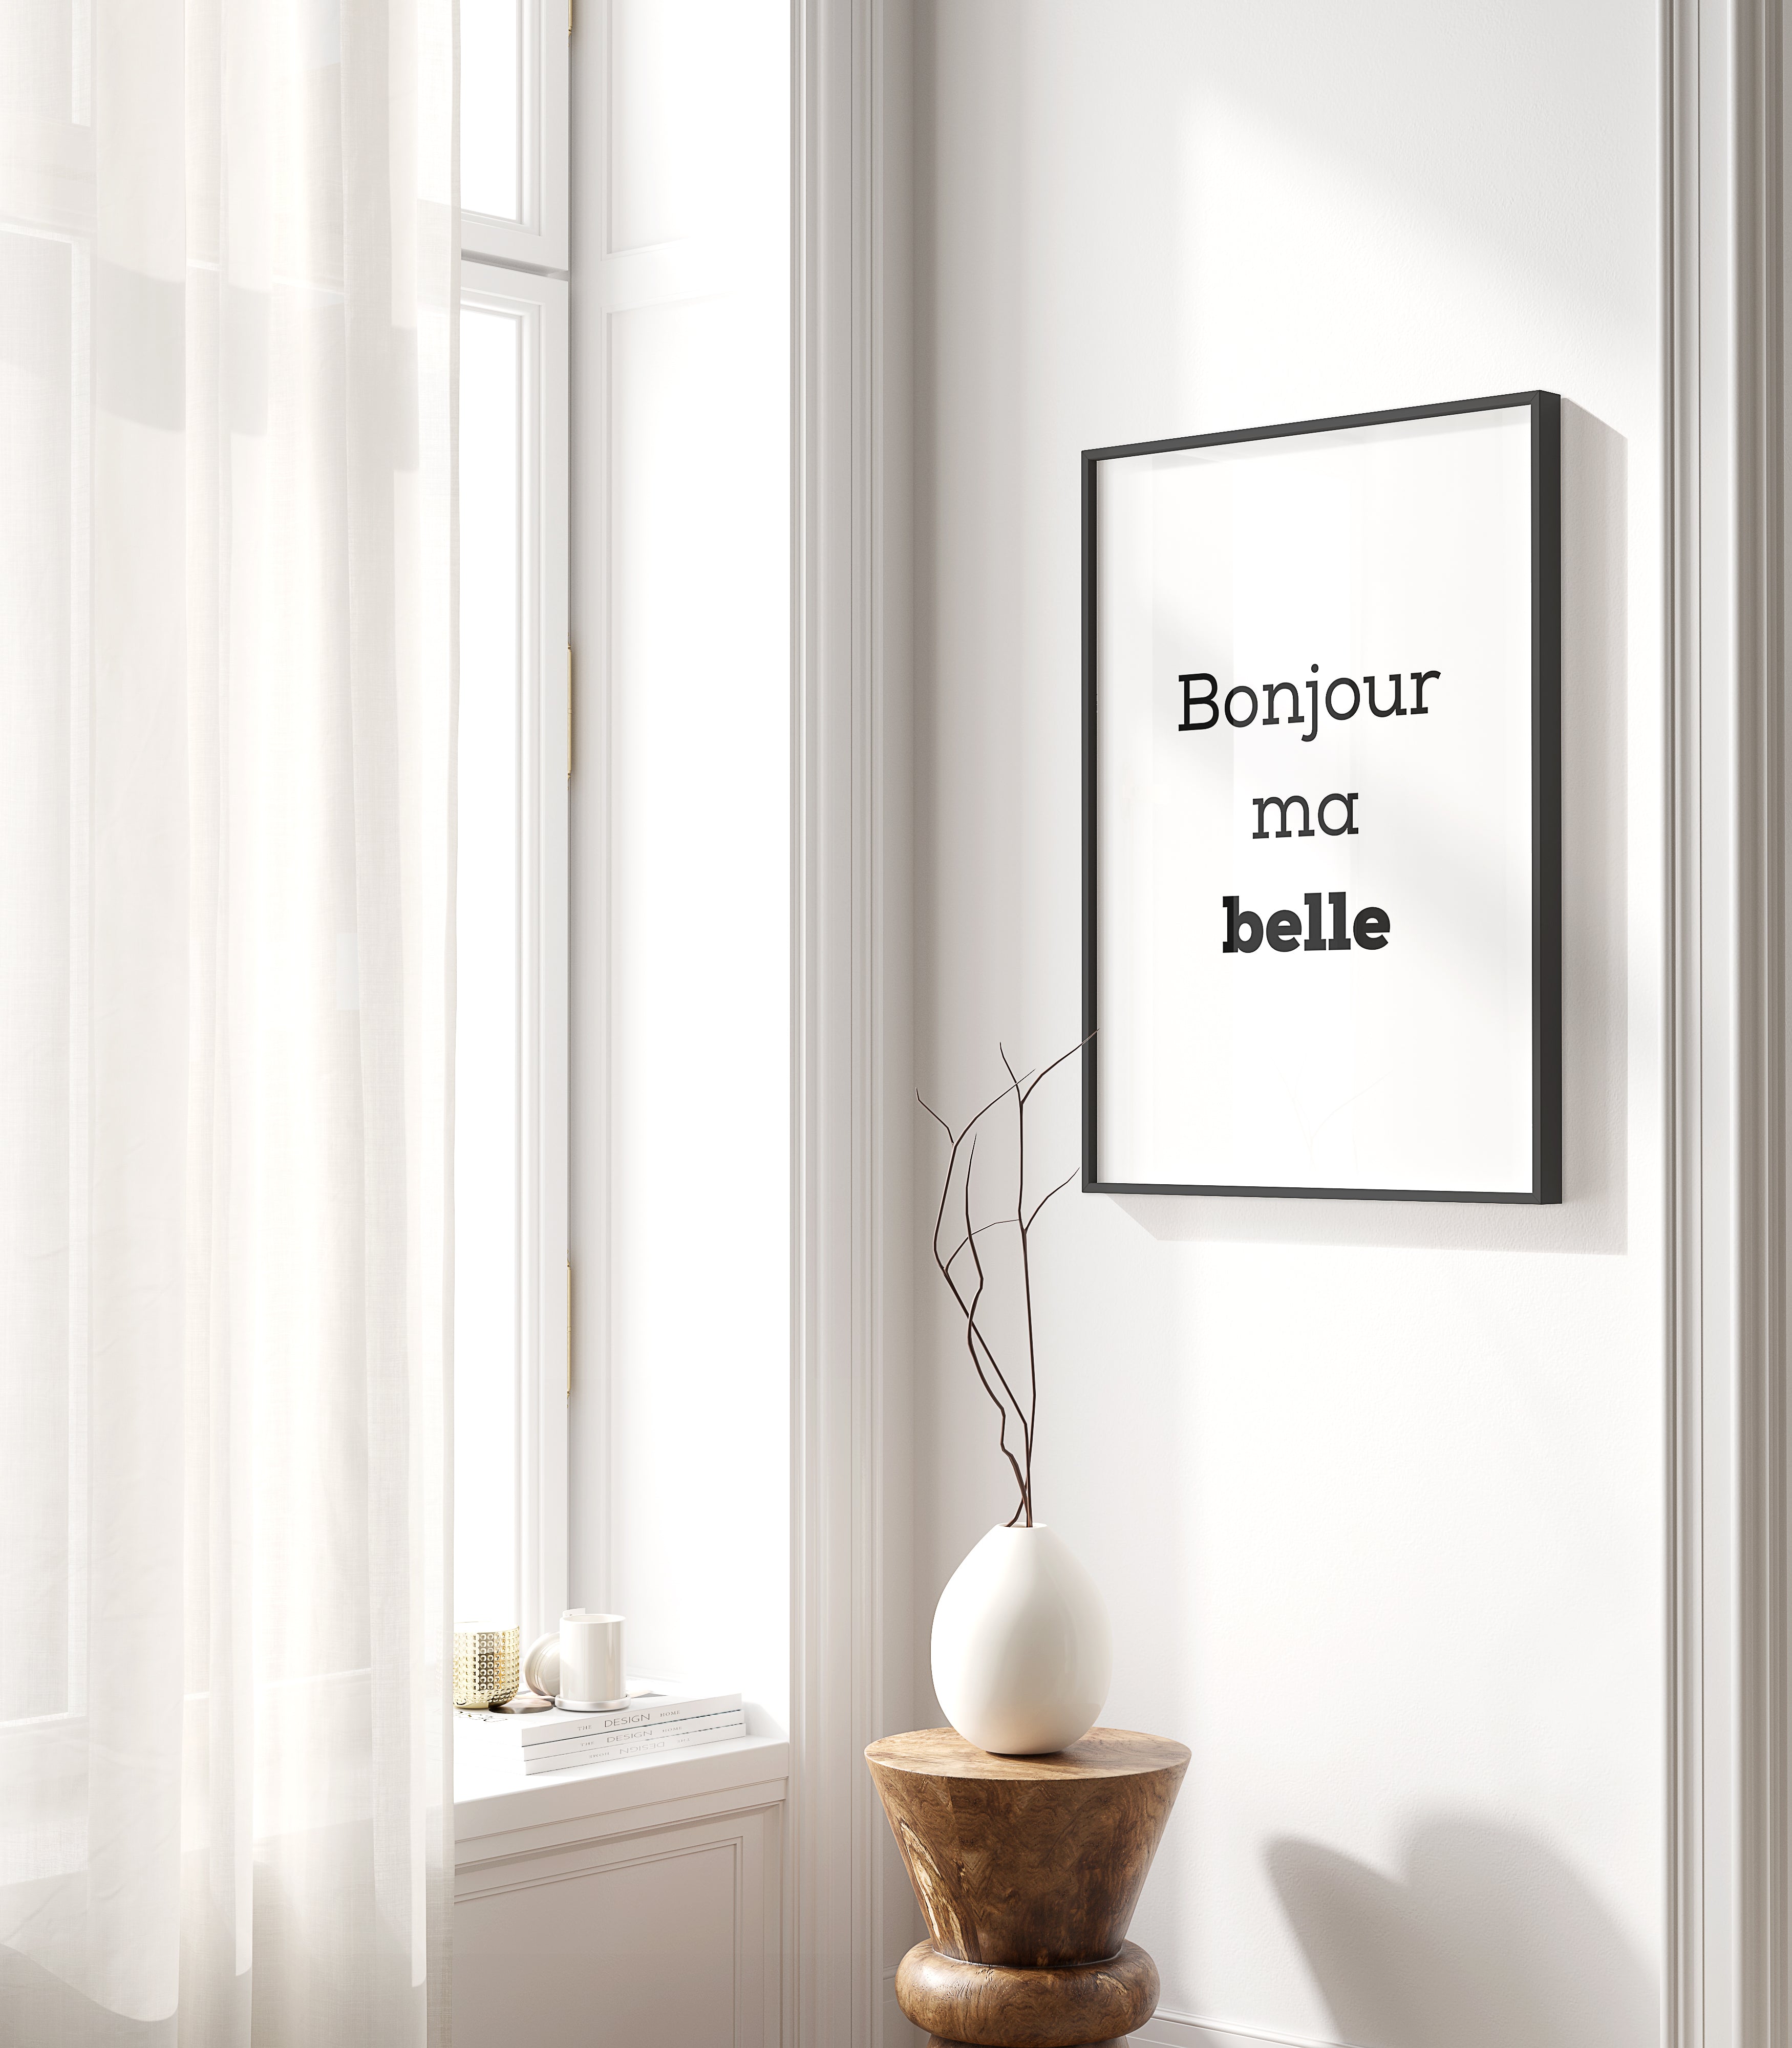 Statement, Bonjour – belle, Typographic studio5prints ma Poster French Print,